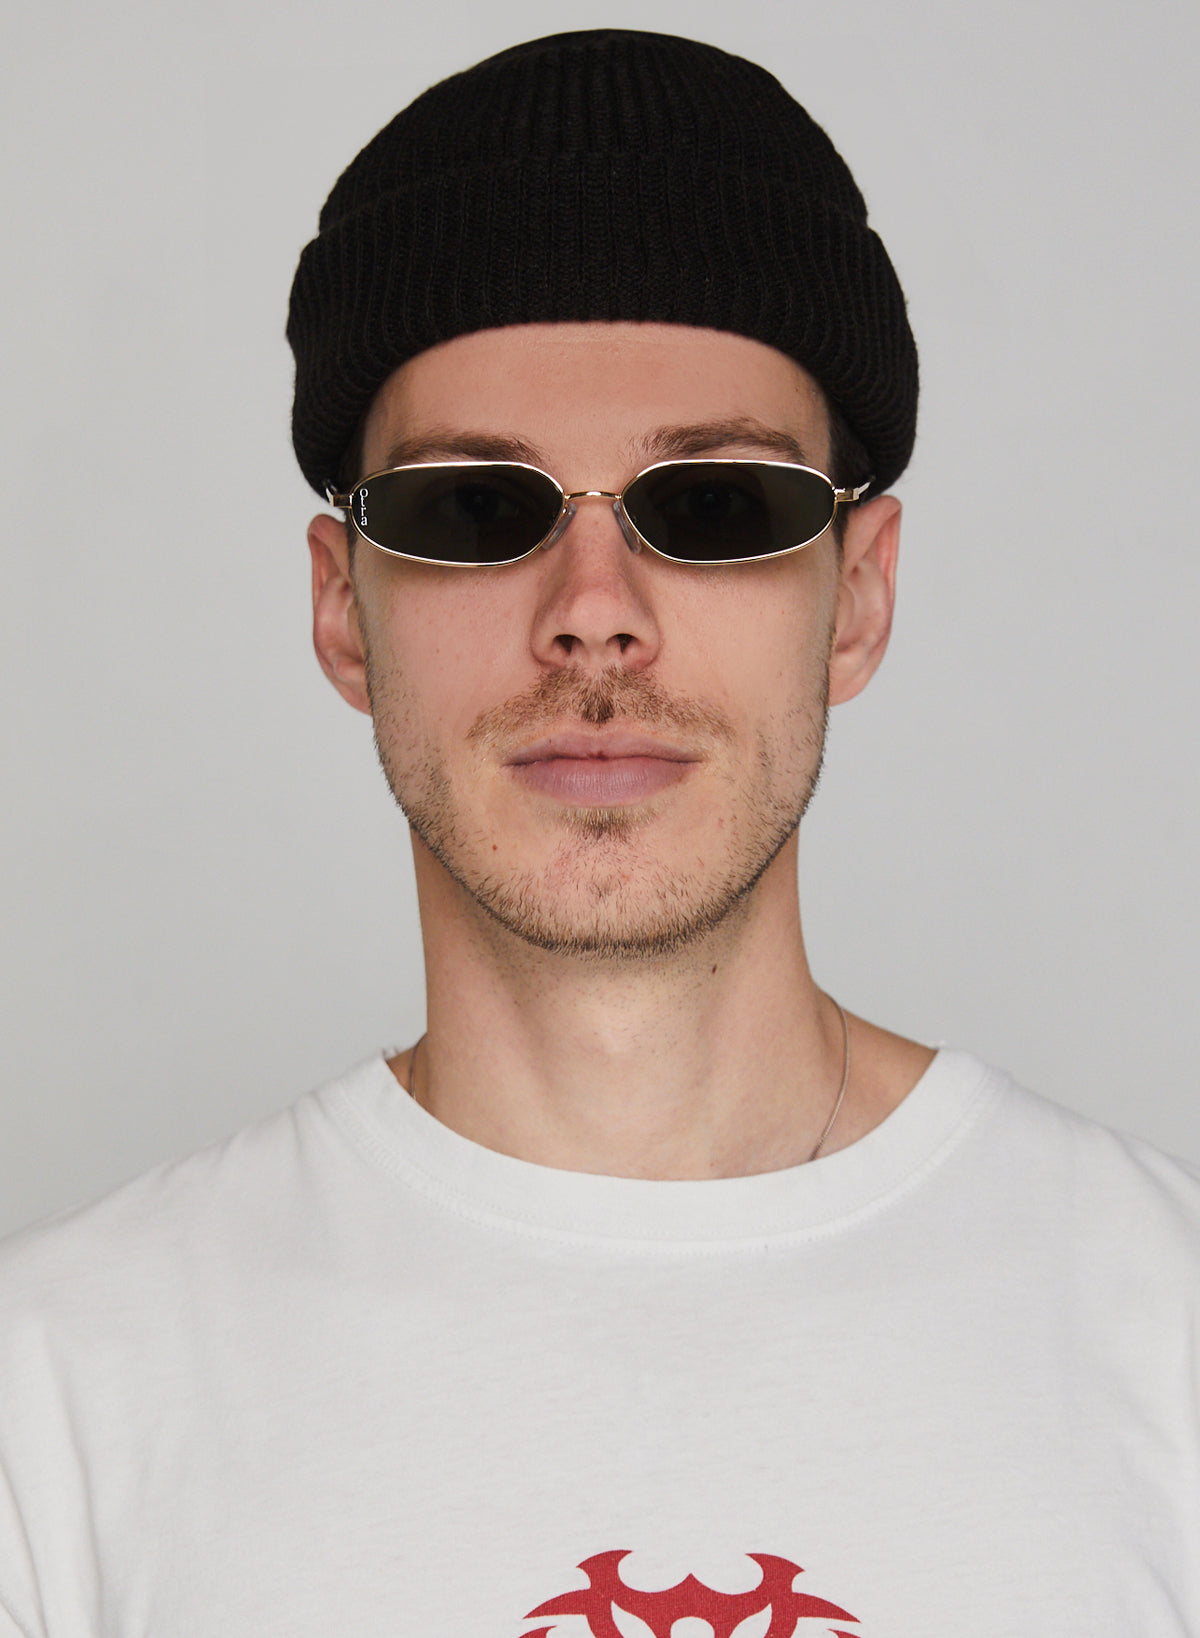 Male model wearing Drew metal sunglasses with gold metal frame and green lenses